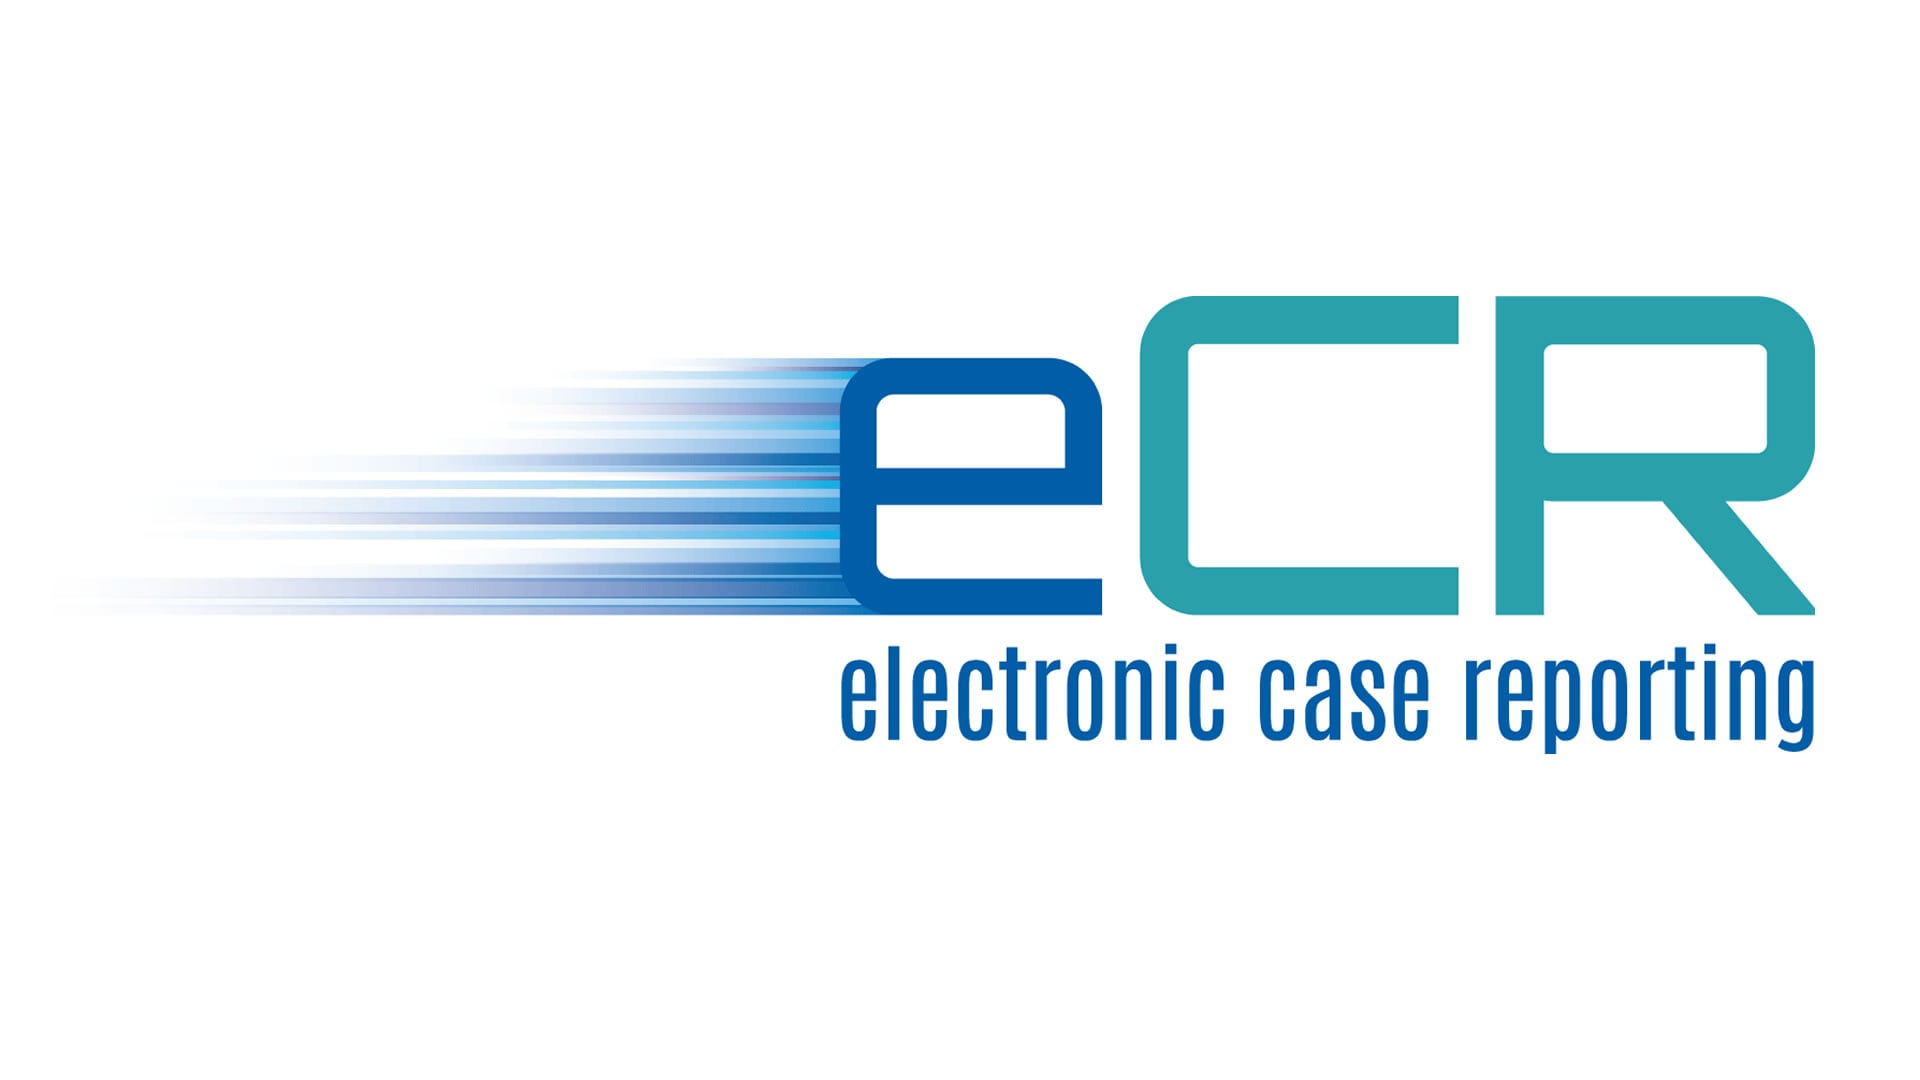 Electronic Case Reporting